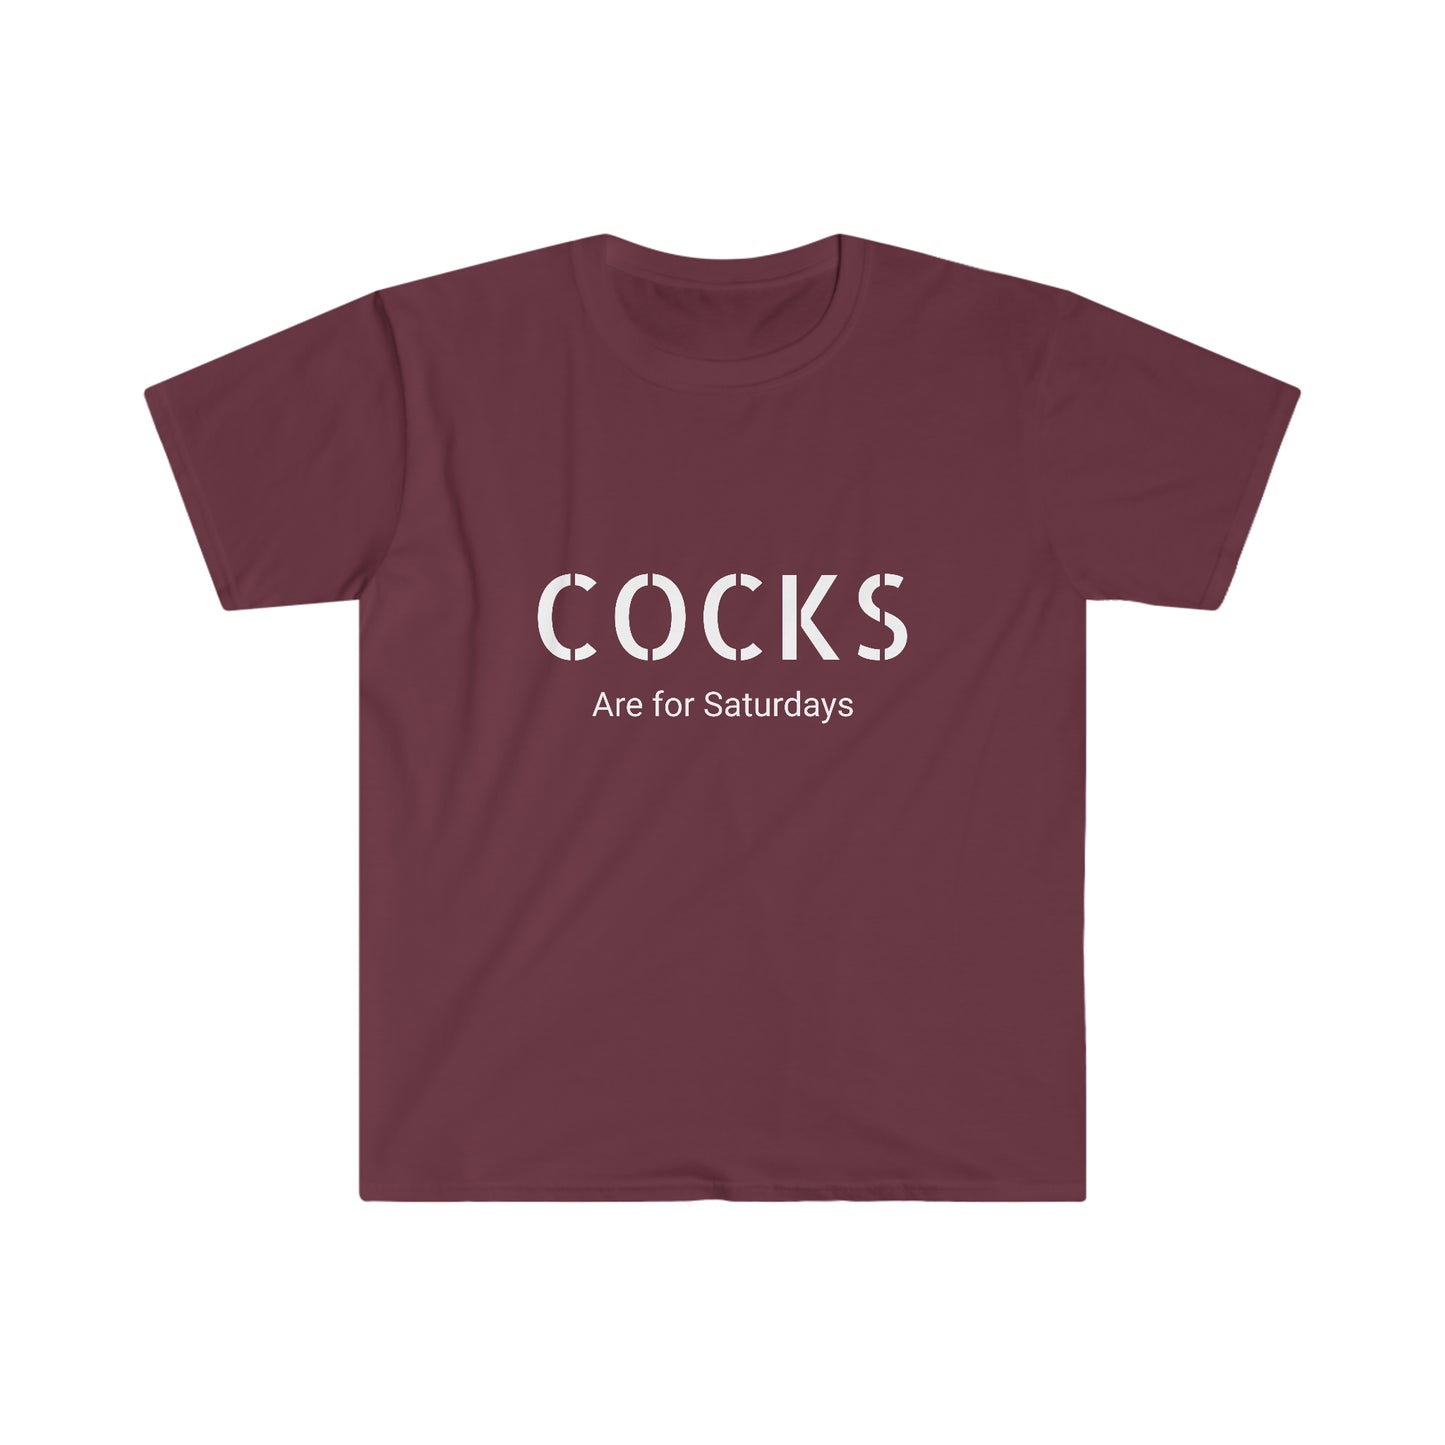 Cocks are for Saturdays Unisex Softstyle T-Shirt